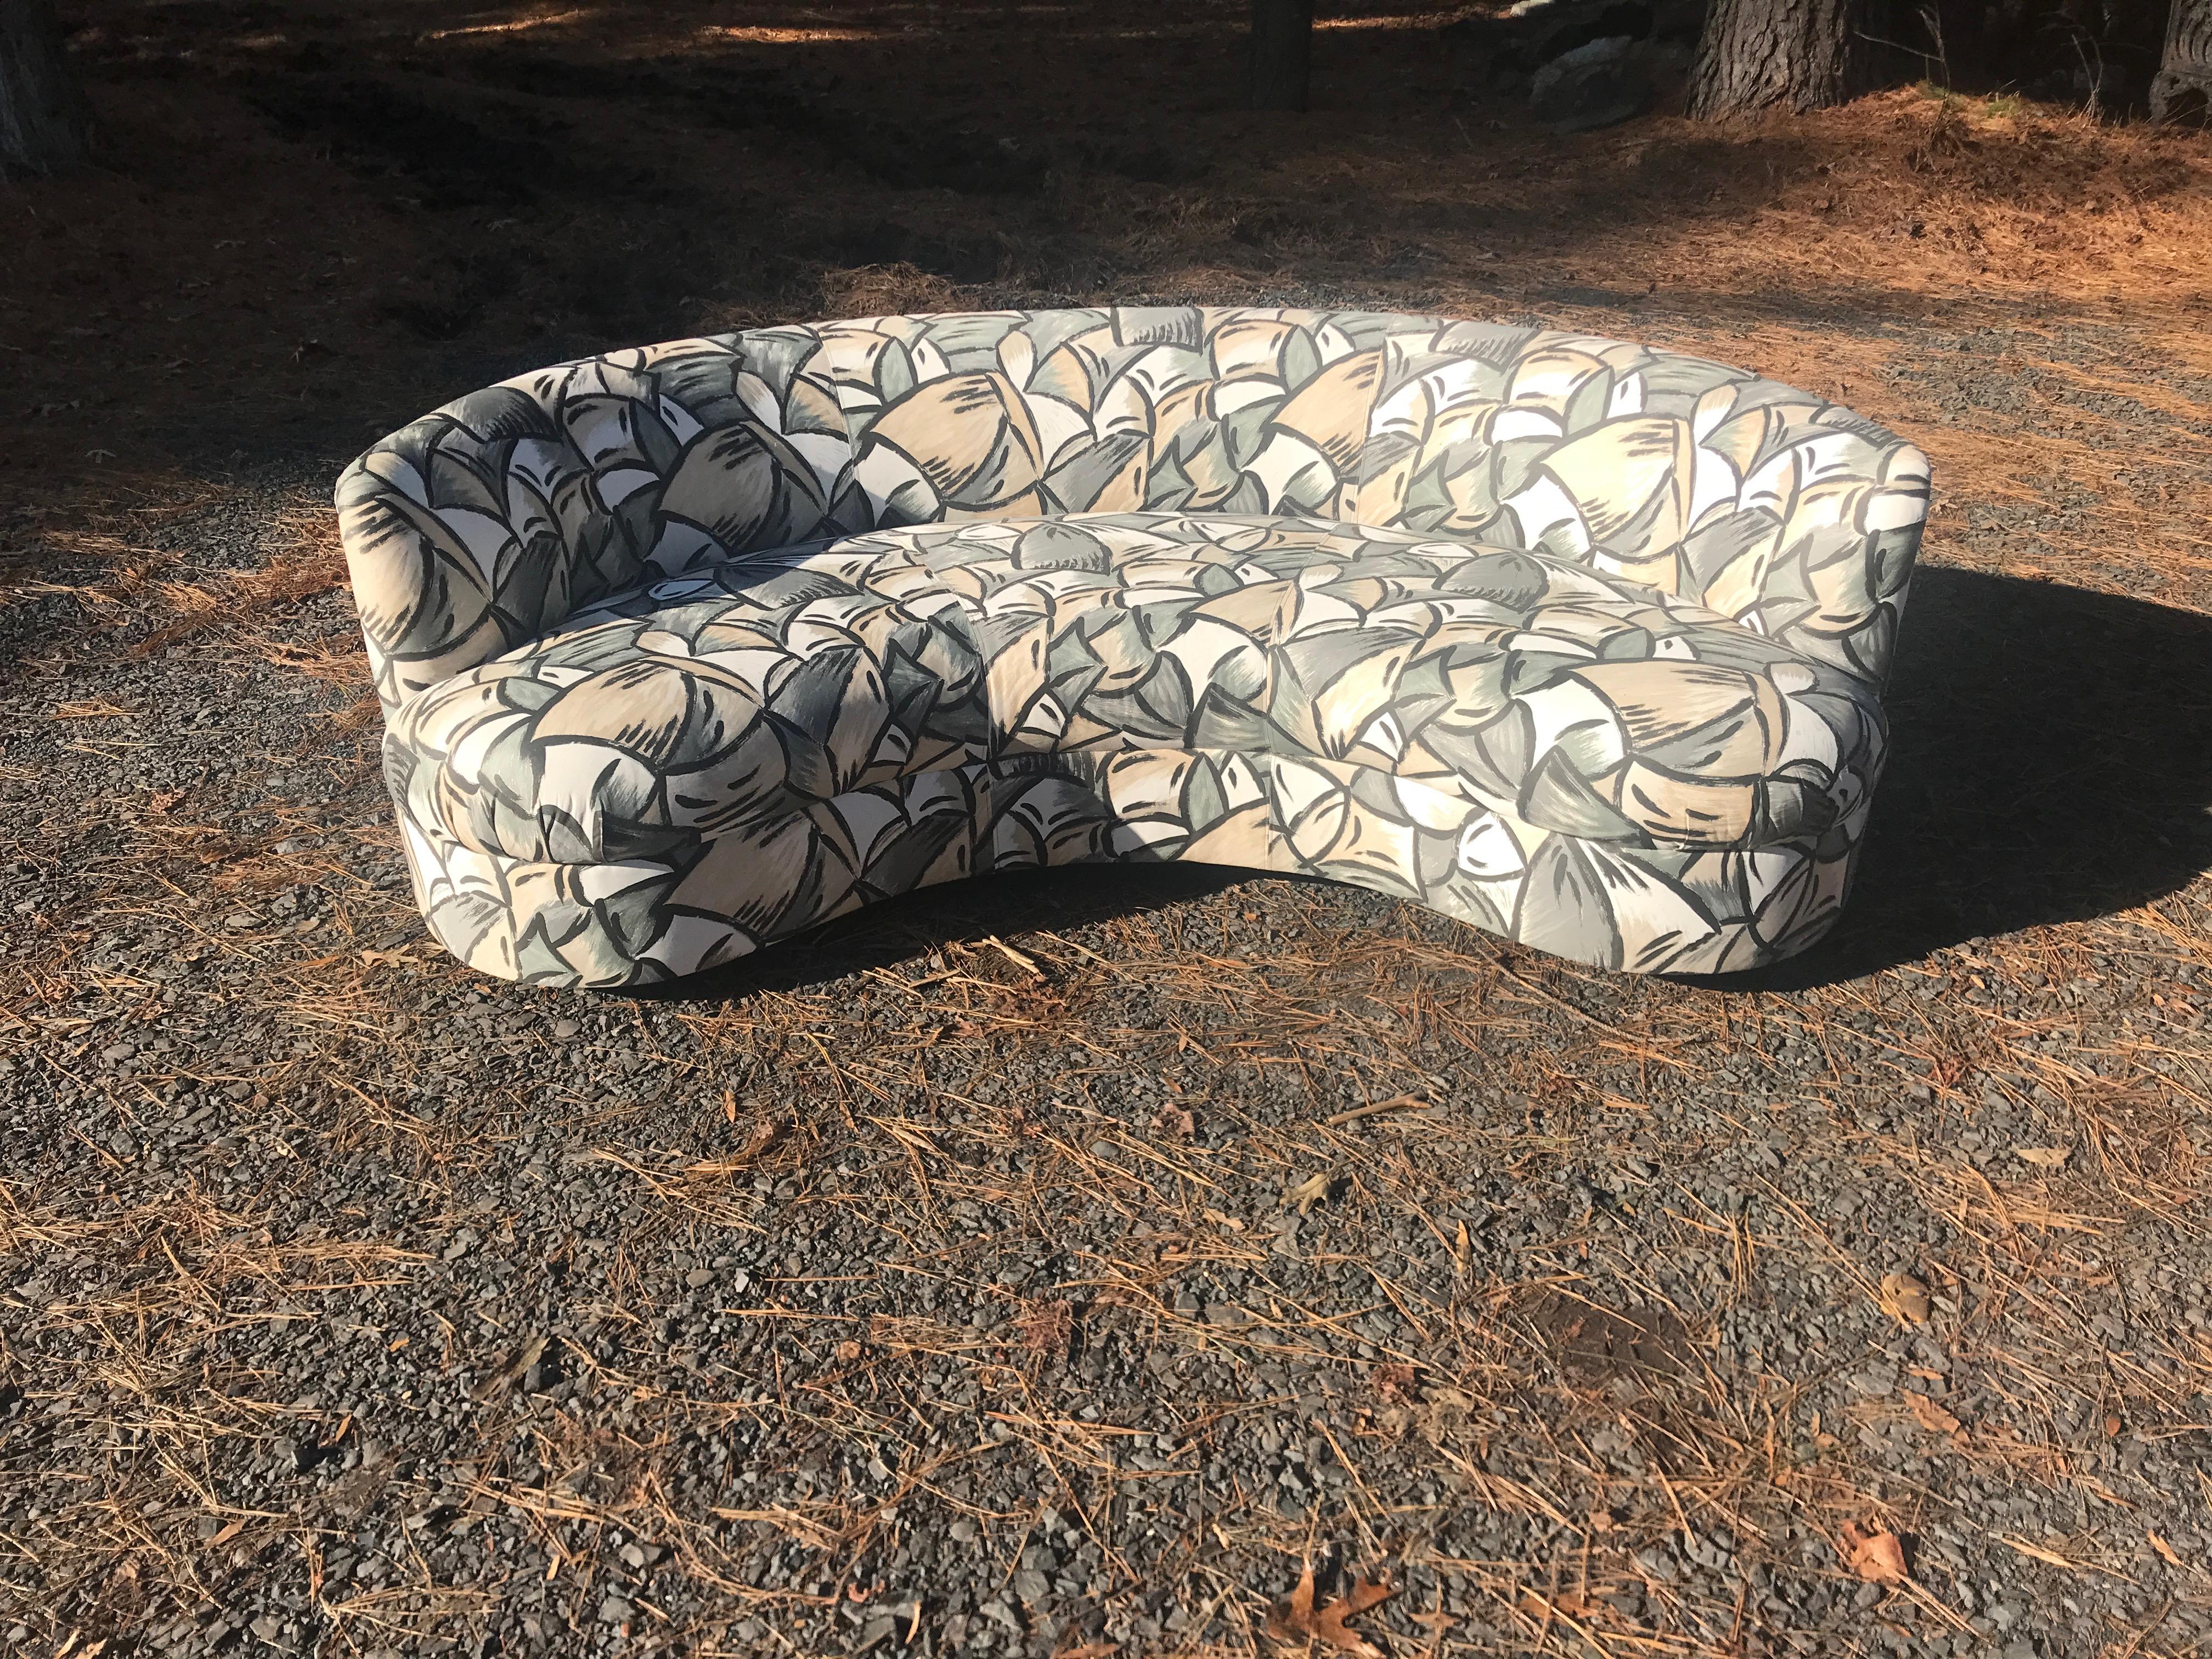 Wonderful pair of Adrian Pearsall style kidney shaped curved sofas. We are loving the bold abstract fabric in grays and shades of beige but these are also great for any fabric you can imagine. These are still in great shape and will be perfect in